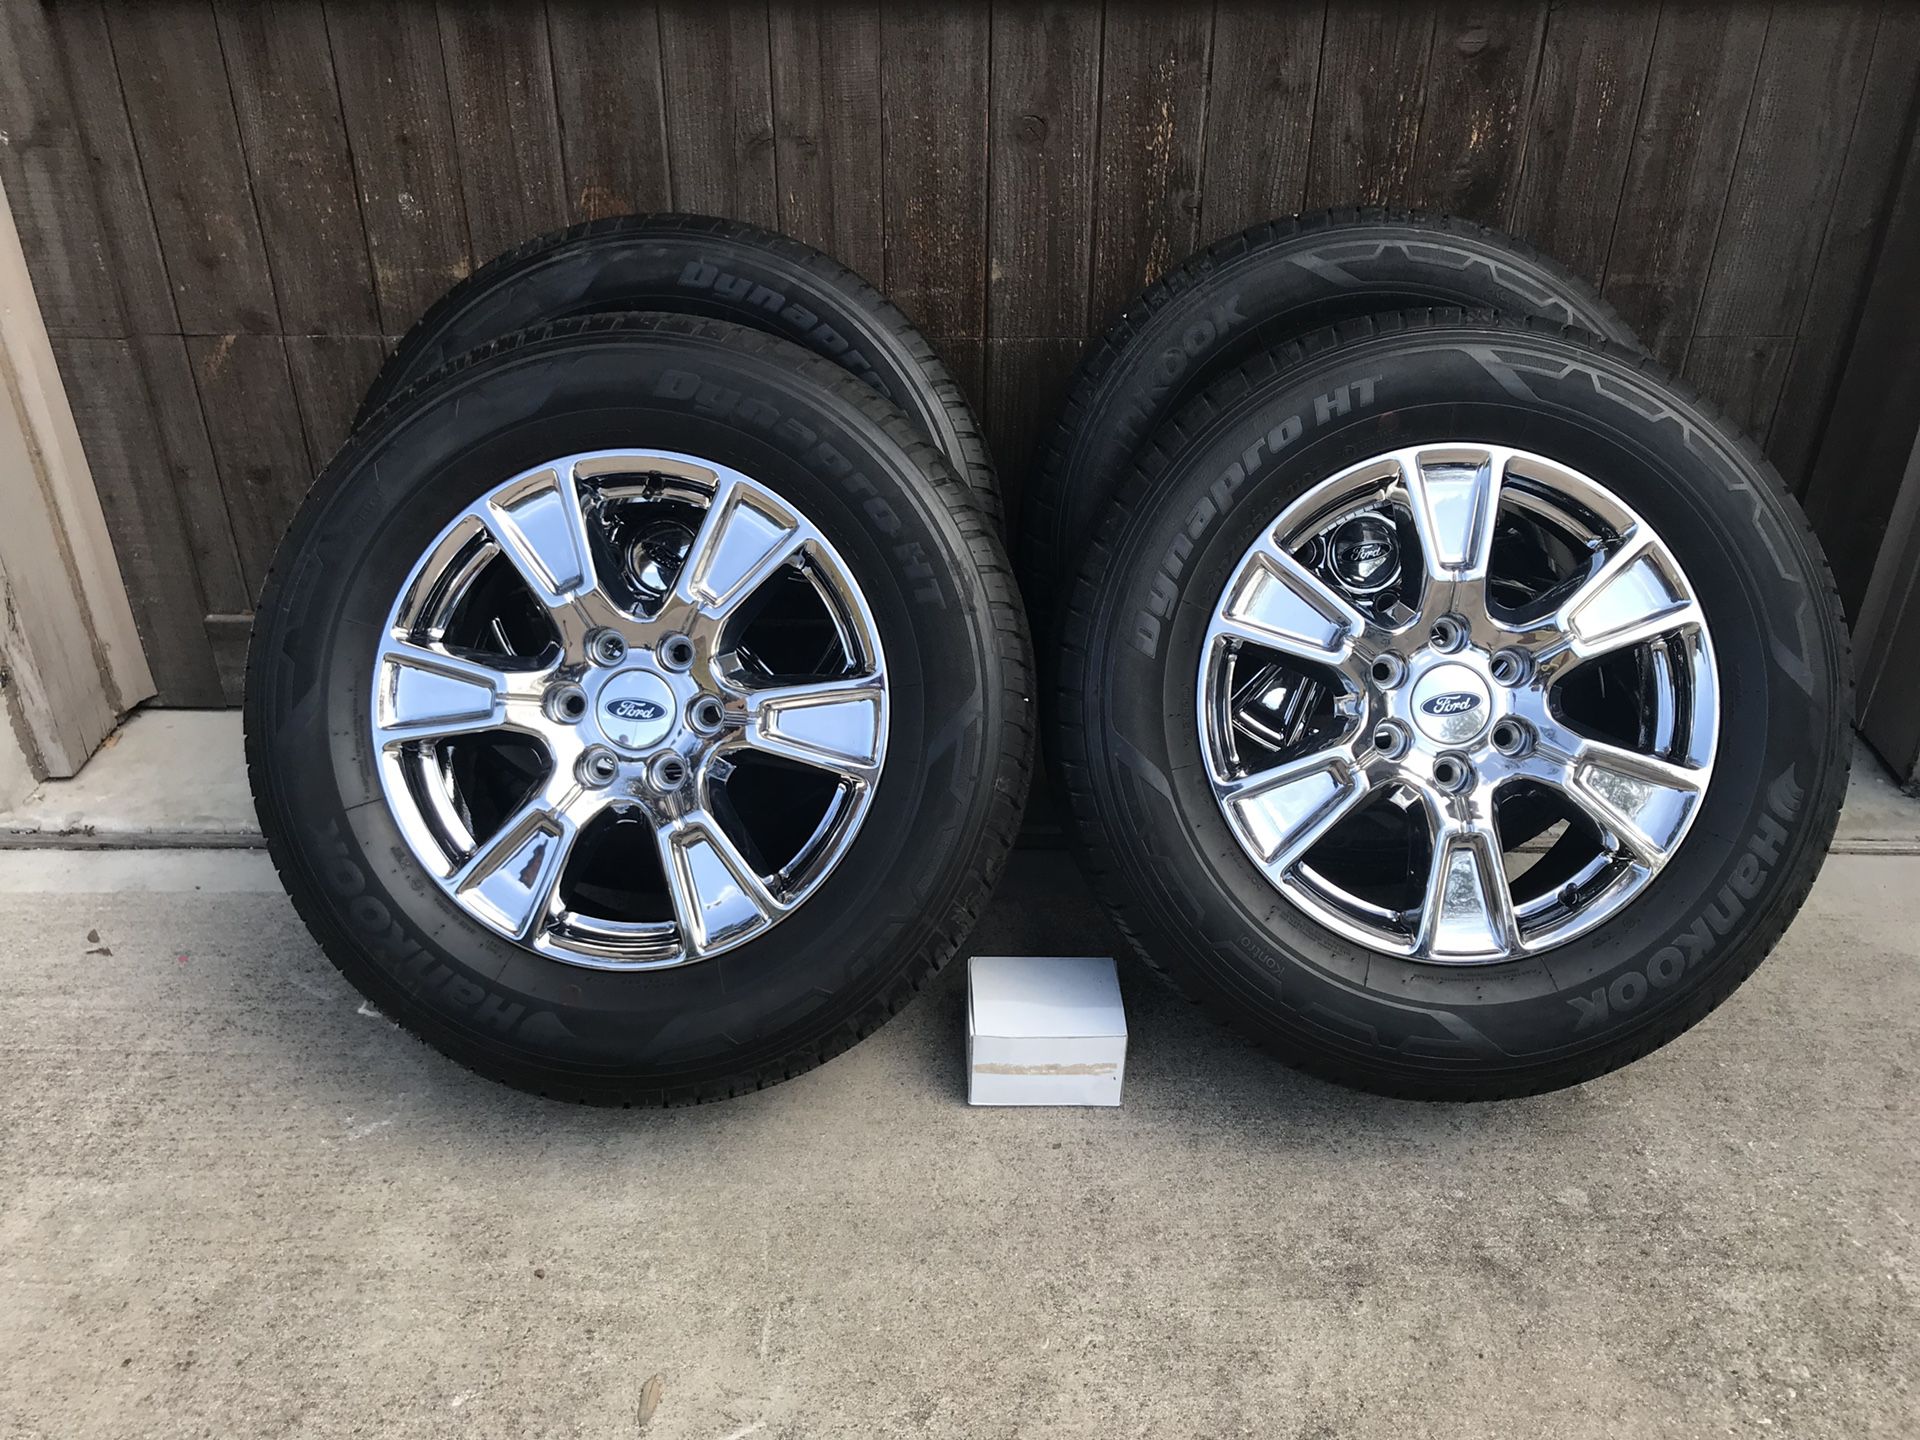 2017 F150 6 lug Chrome Pkg. wheels and rims only 2500 miles on tires.